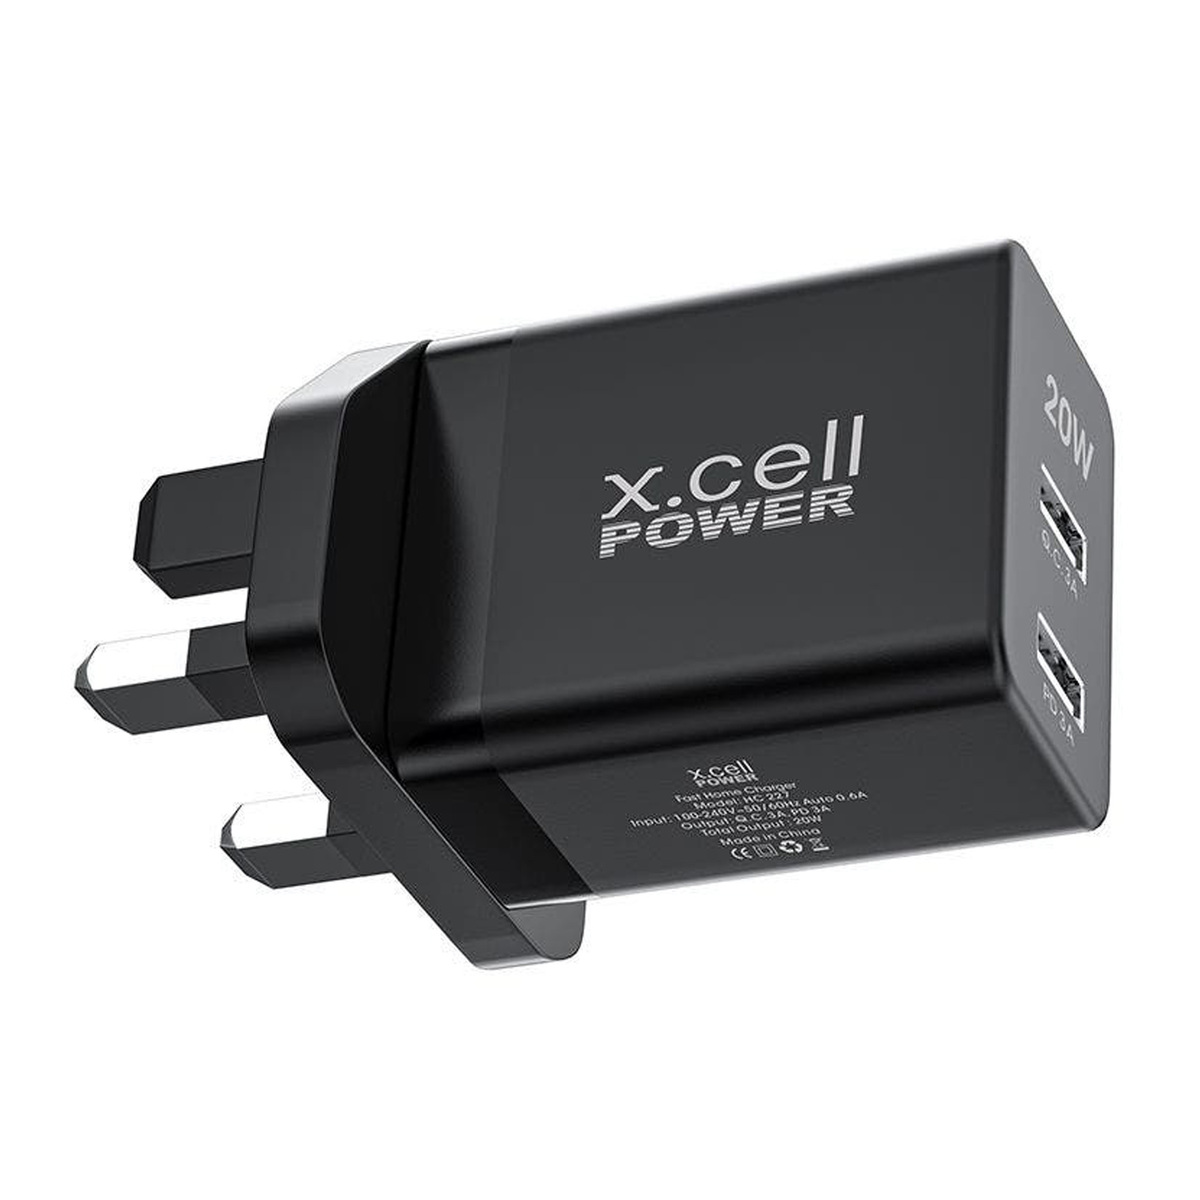 X.Cell 20 W Home charger, Black, HC-227